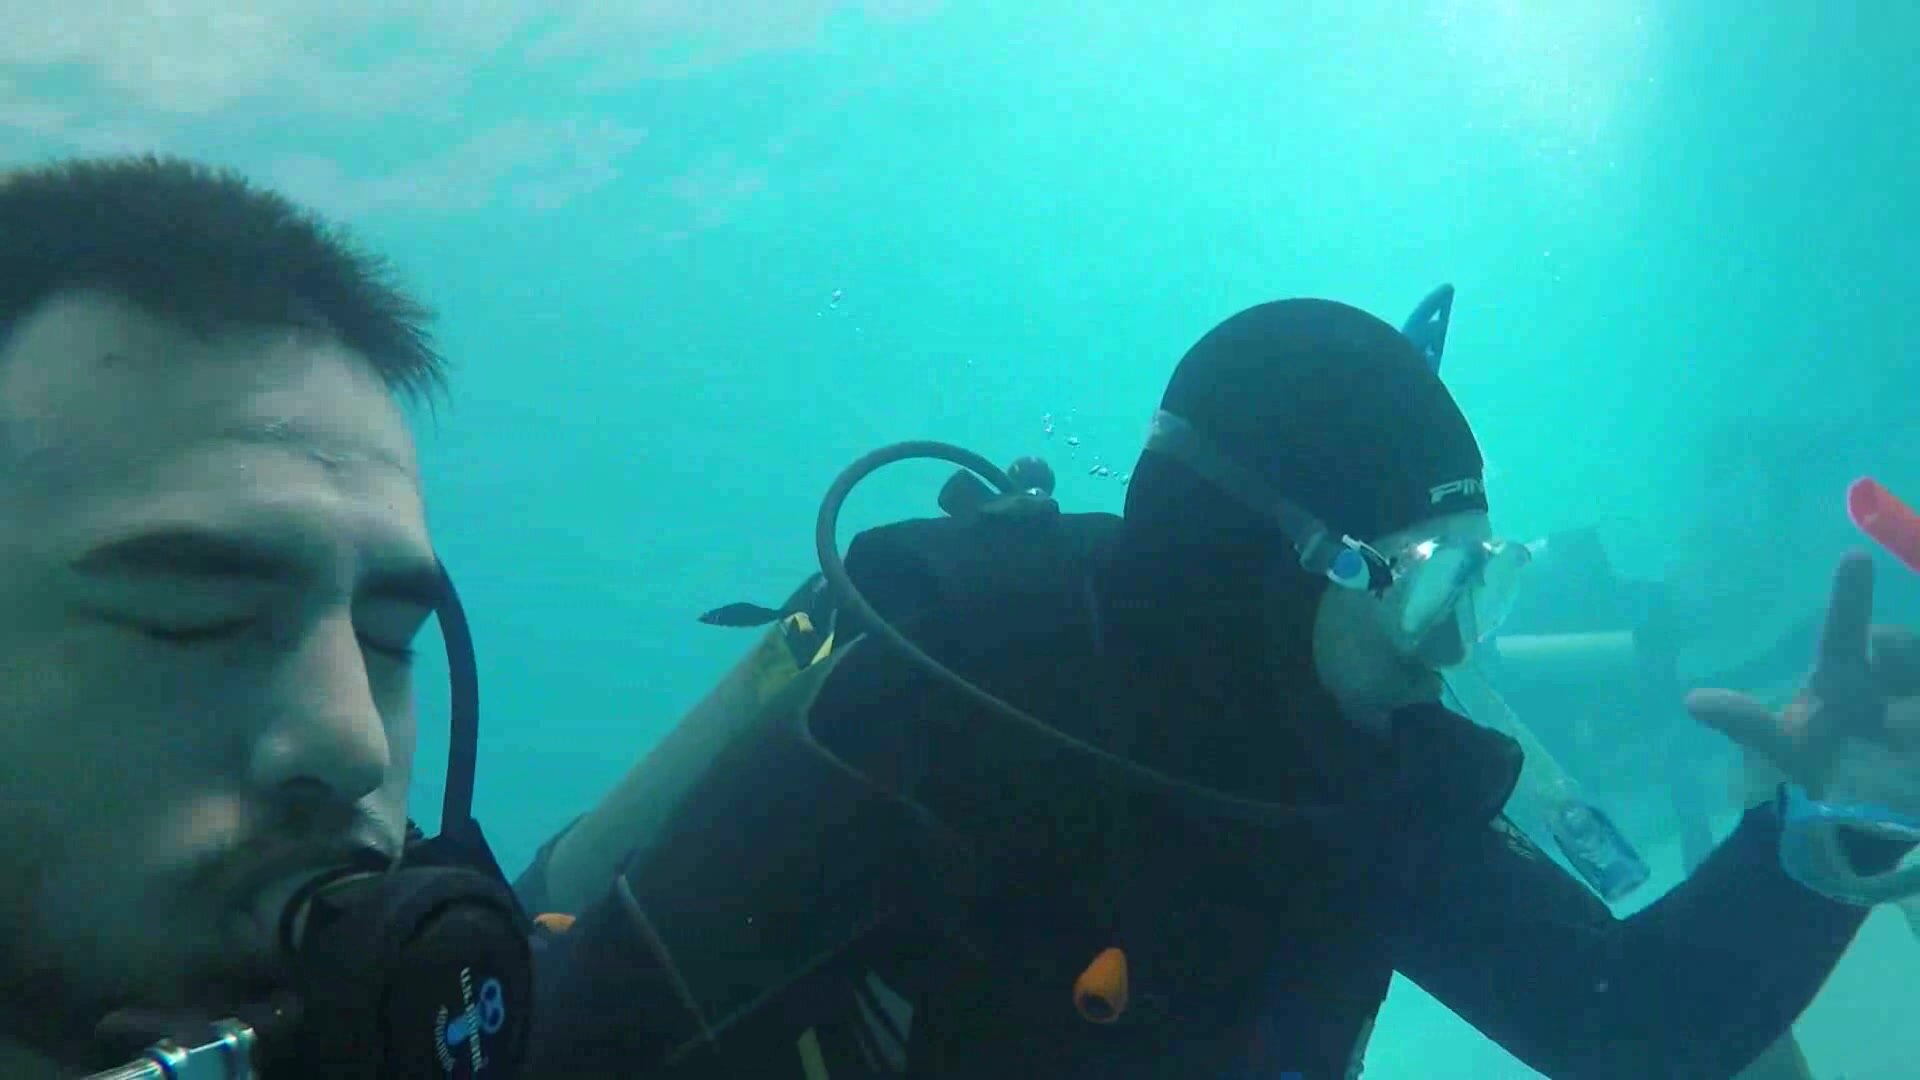 Cheeky scubadiver barefaced underwater